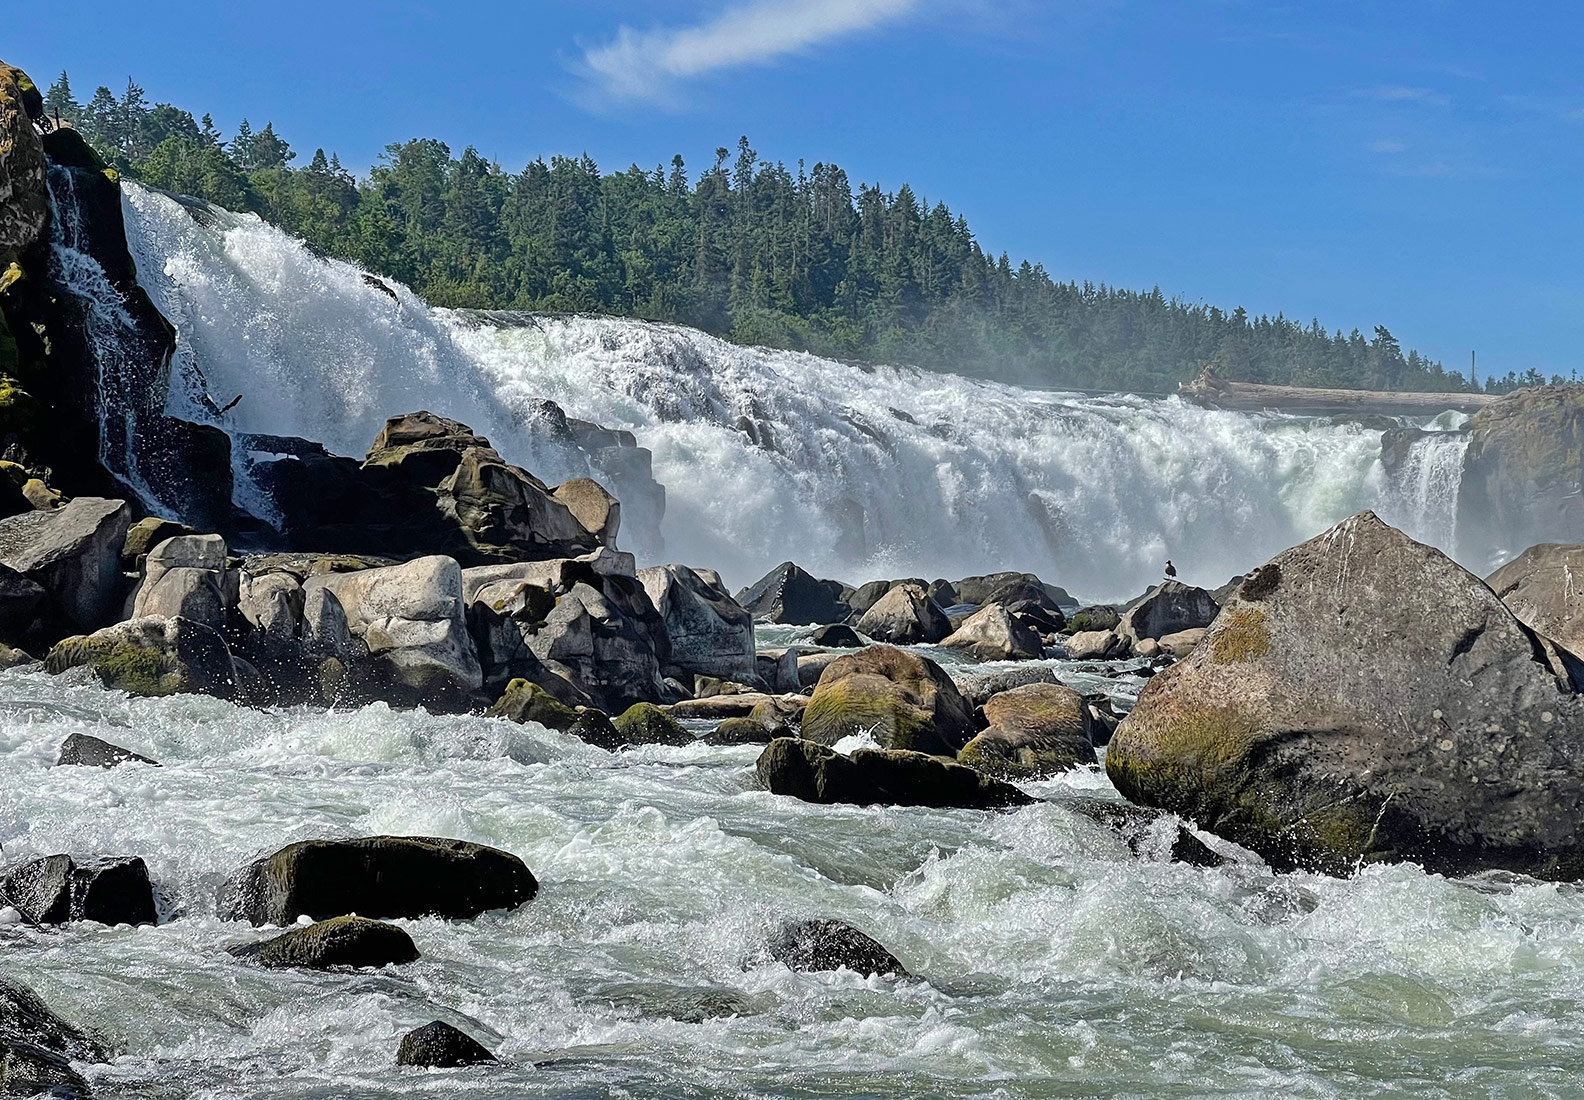 Close up of Willamette falls with rapids and rocks in the foreground.